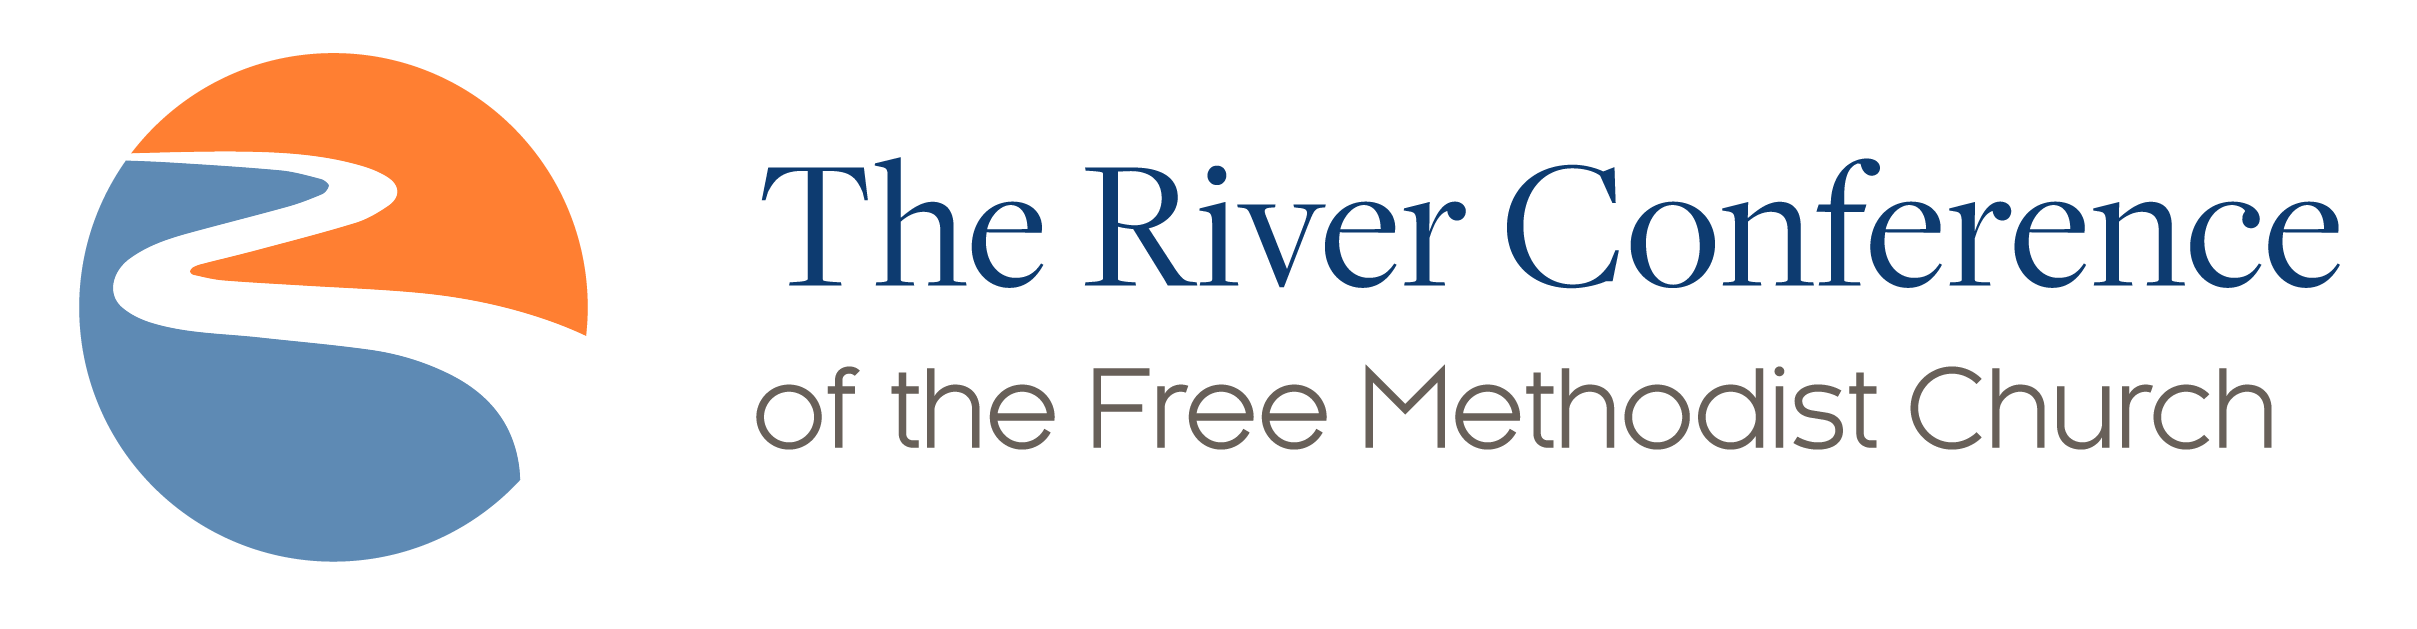 The River Conference of The Free Methodist Church. river emblem in light blue and orange